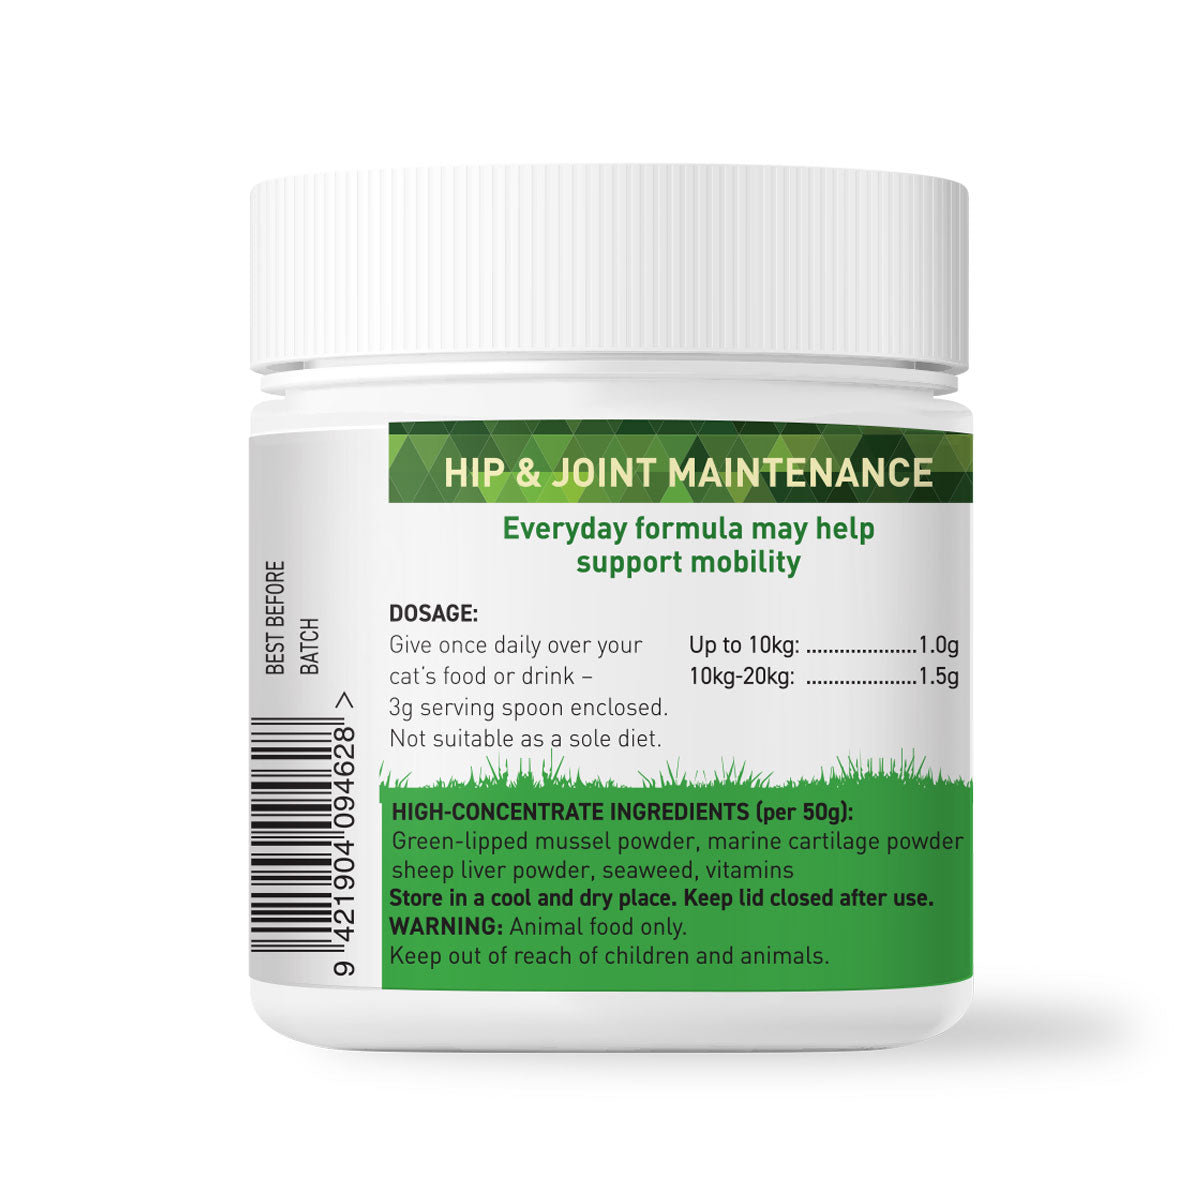 Nutreats Vitals Hip & Joint powder for cats - supporting naturally healthy hips and joints in cats. Rich in Omega 3 and a rich source of chondroitin. totally natural feed supplement for cats supporting healthy hips and joints.. Hip & Joint maintenance- an everyday form Lea supporting your cat's mobility. 